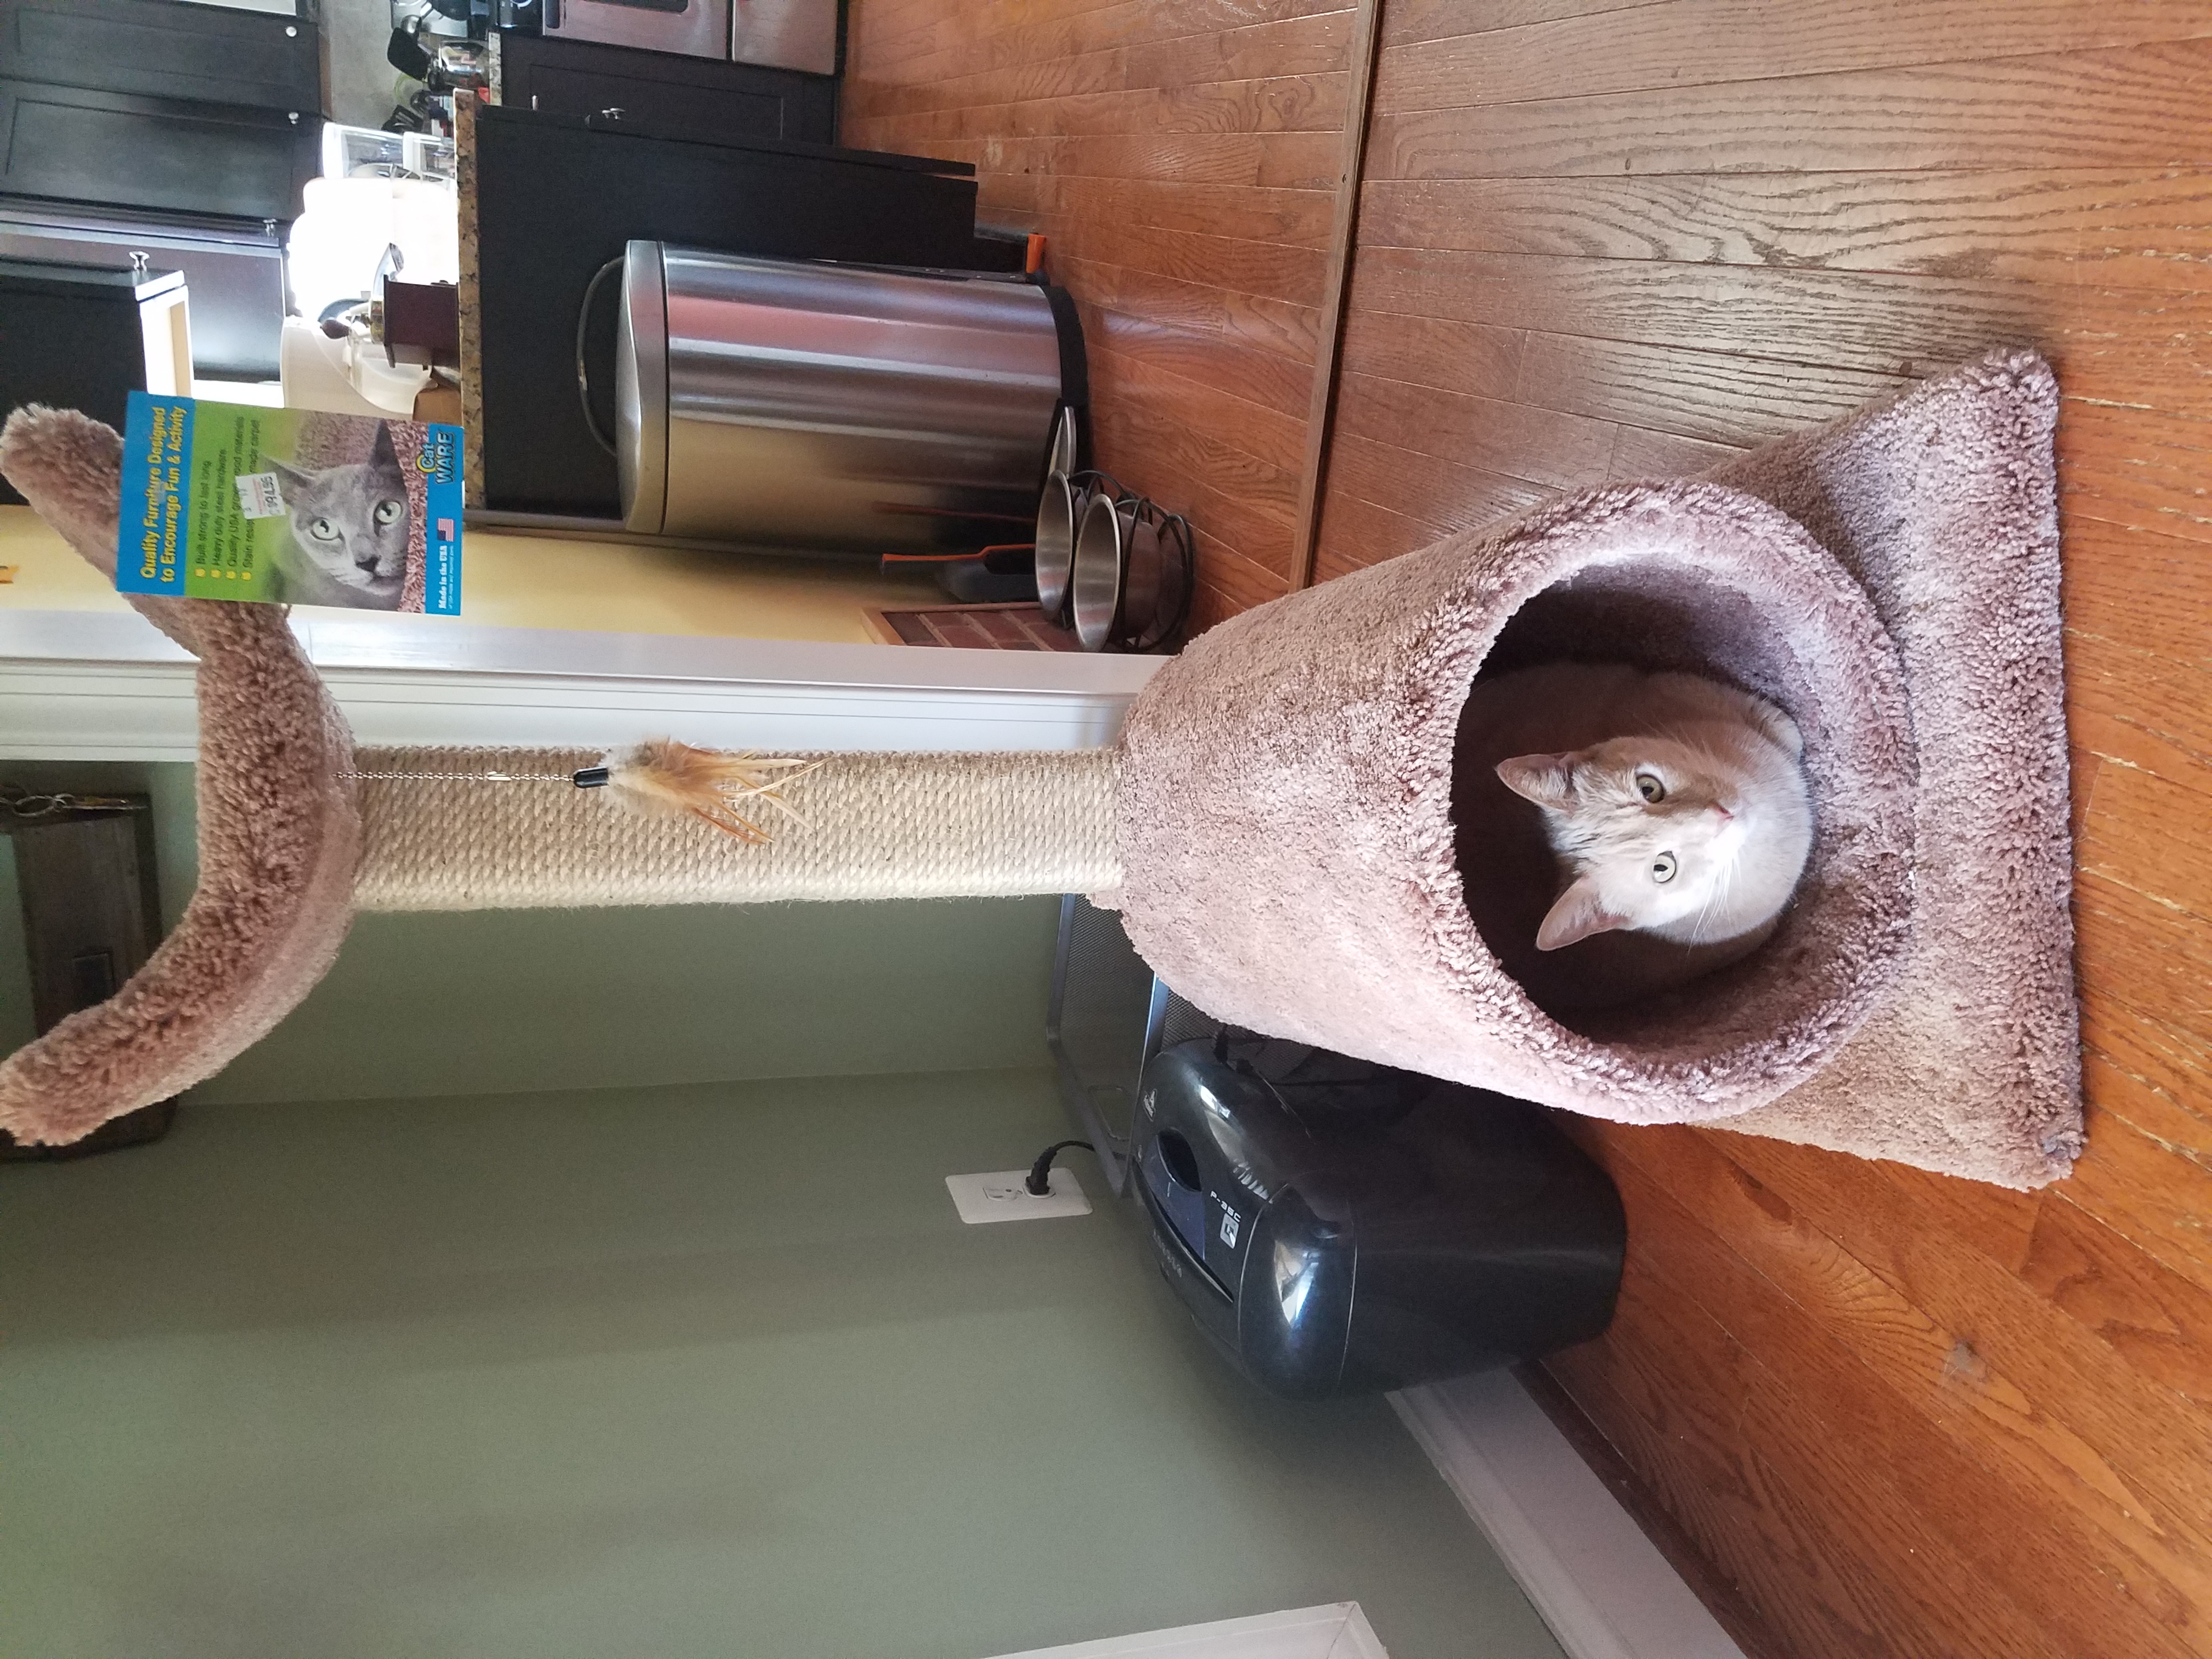 Toby perched in a cat house inside a large tube.